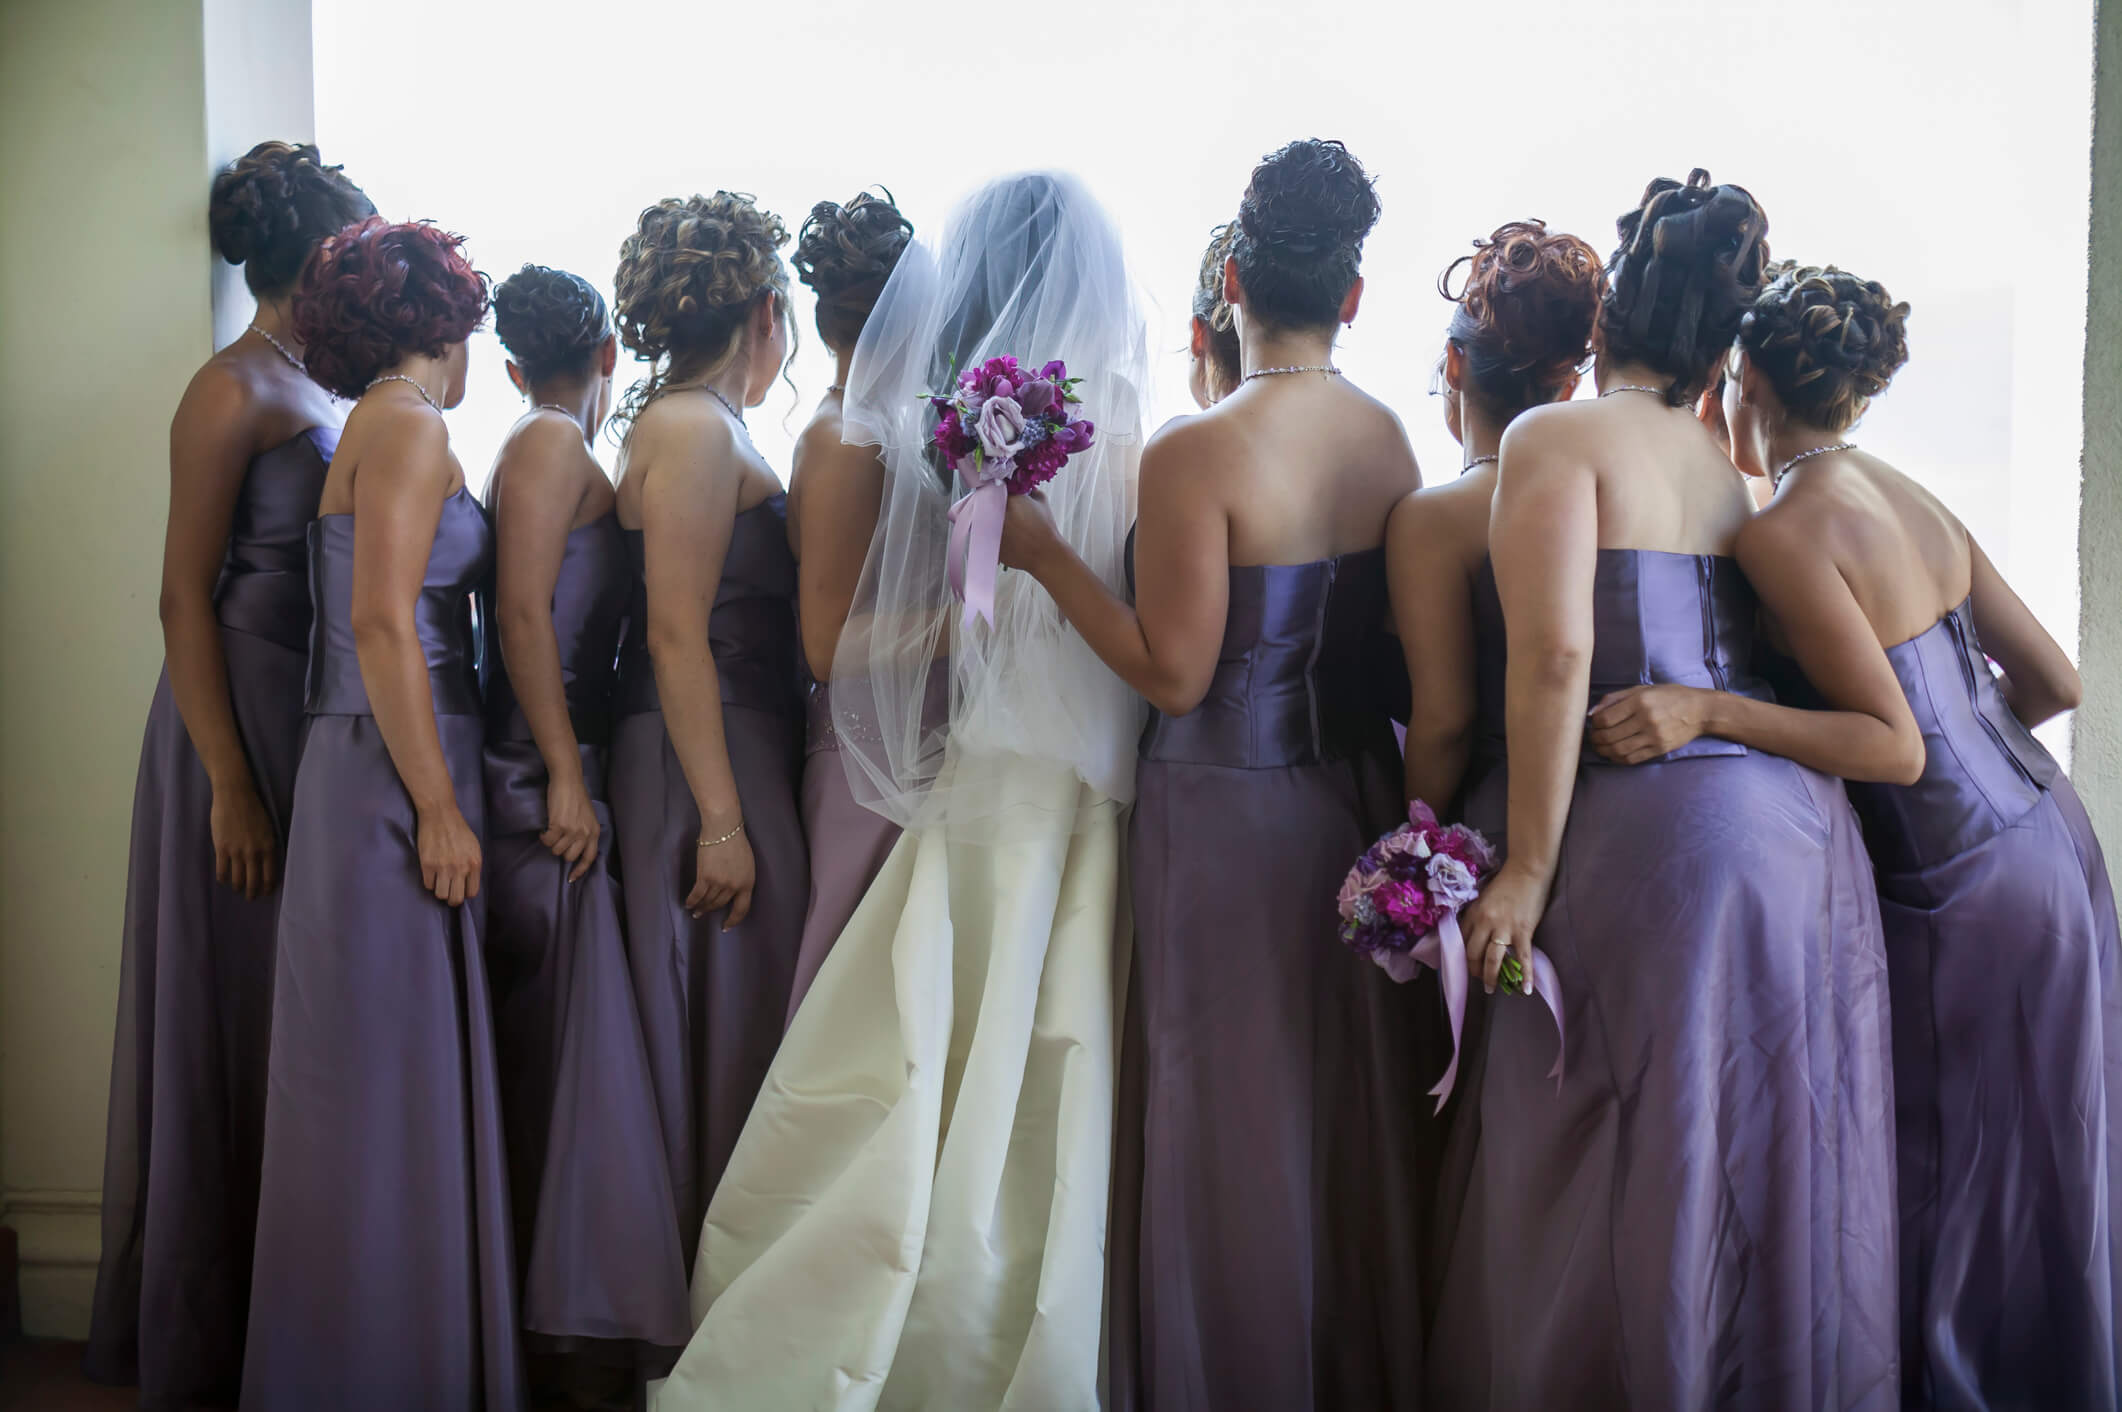 Bridesmaids either side of a bride in purple dresses